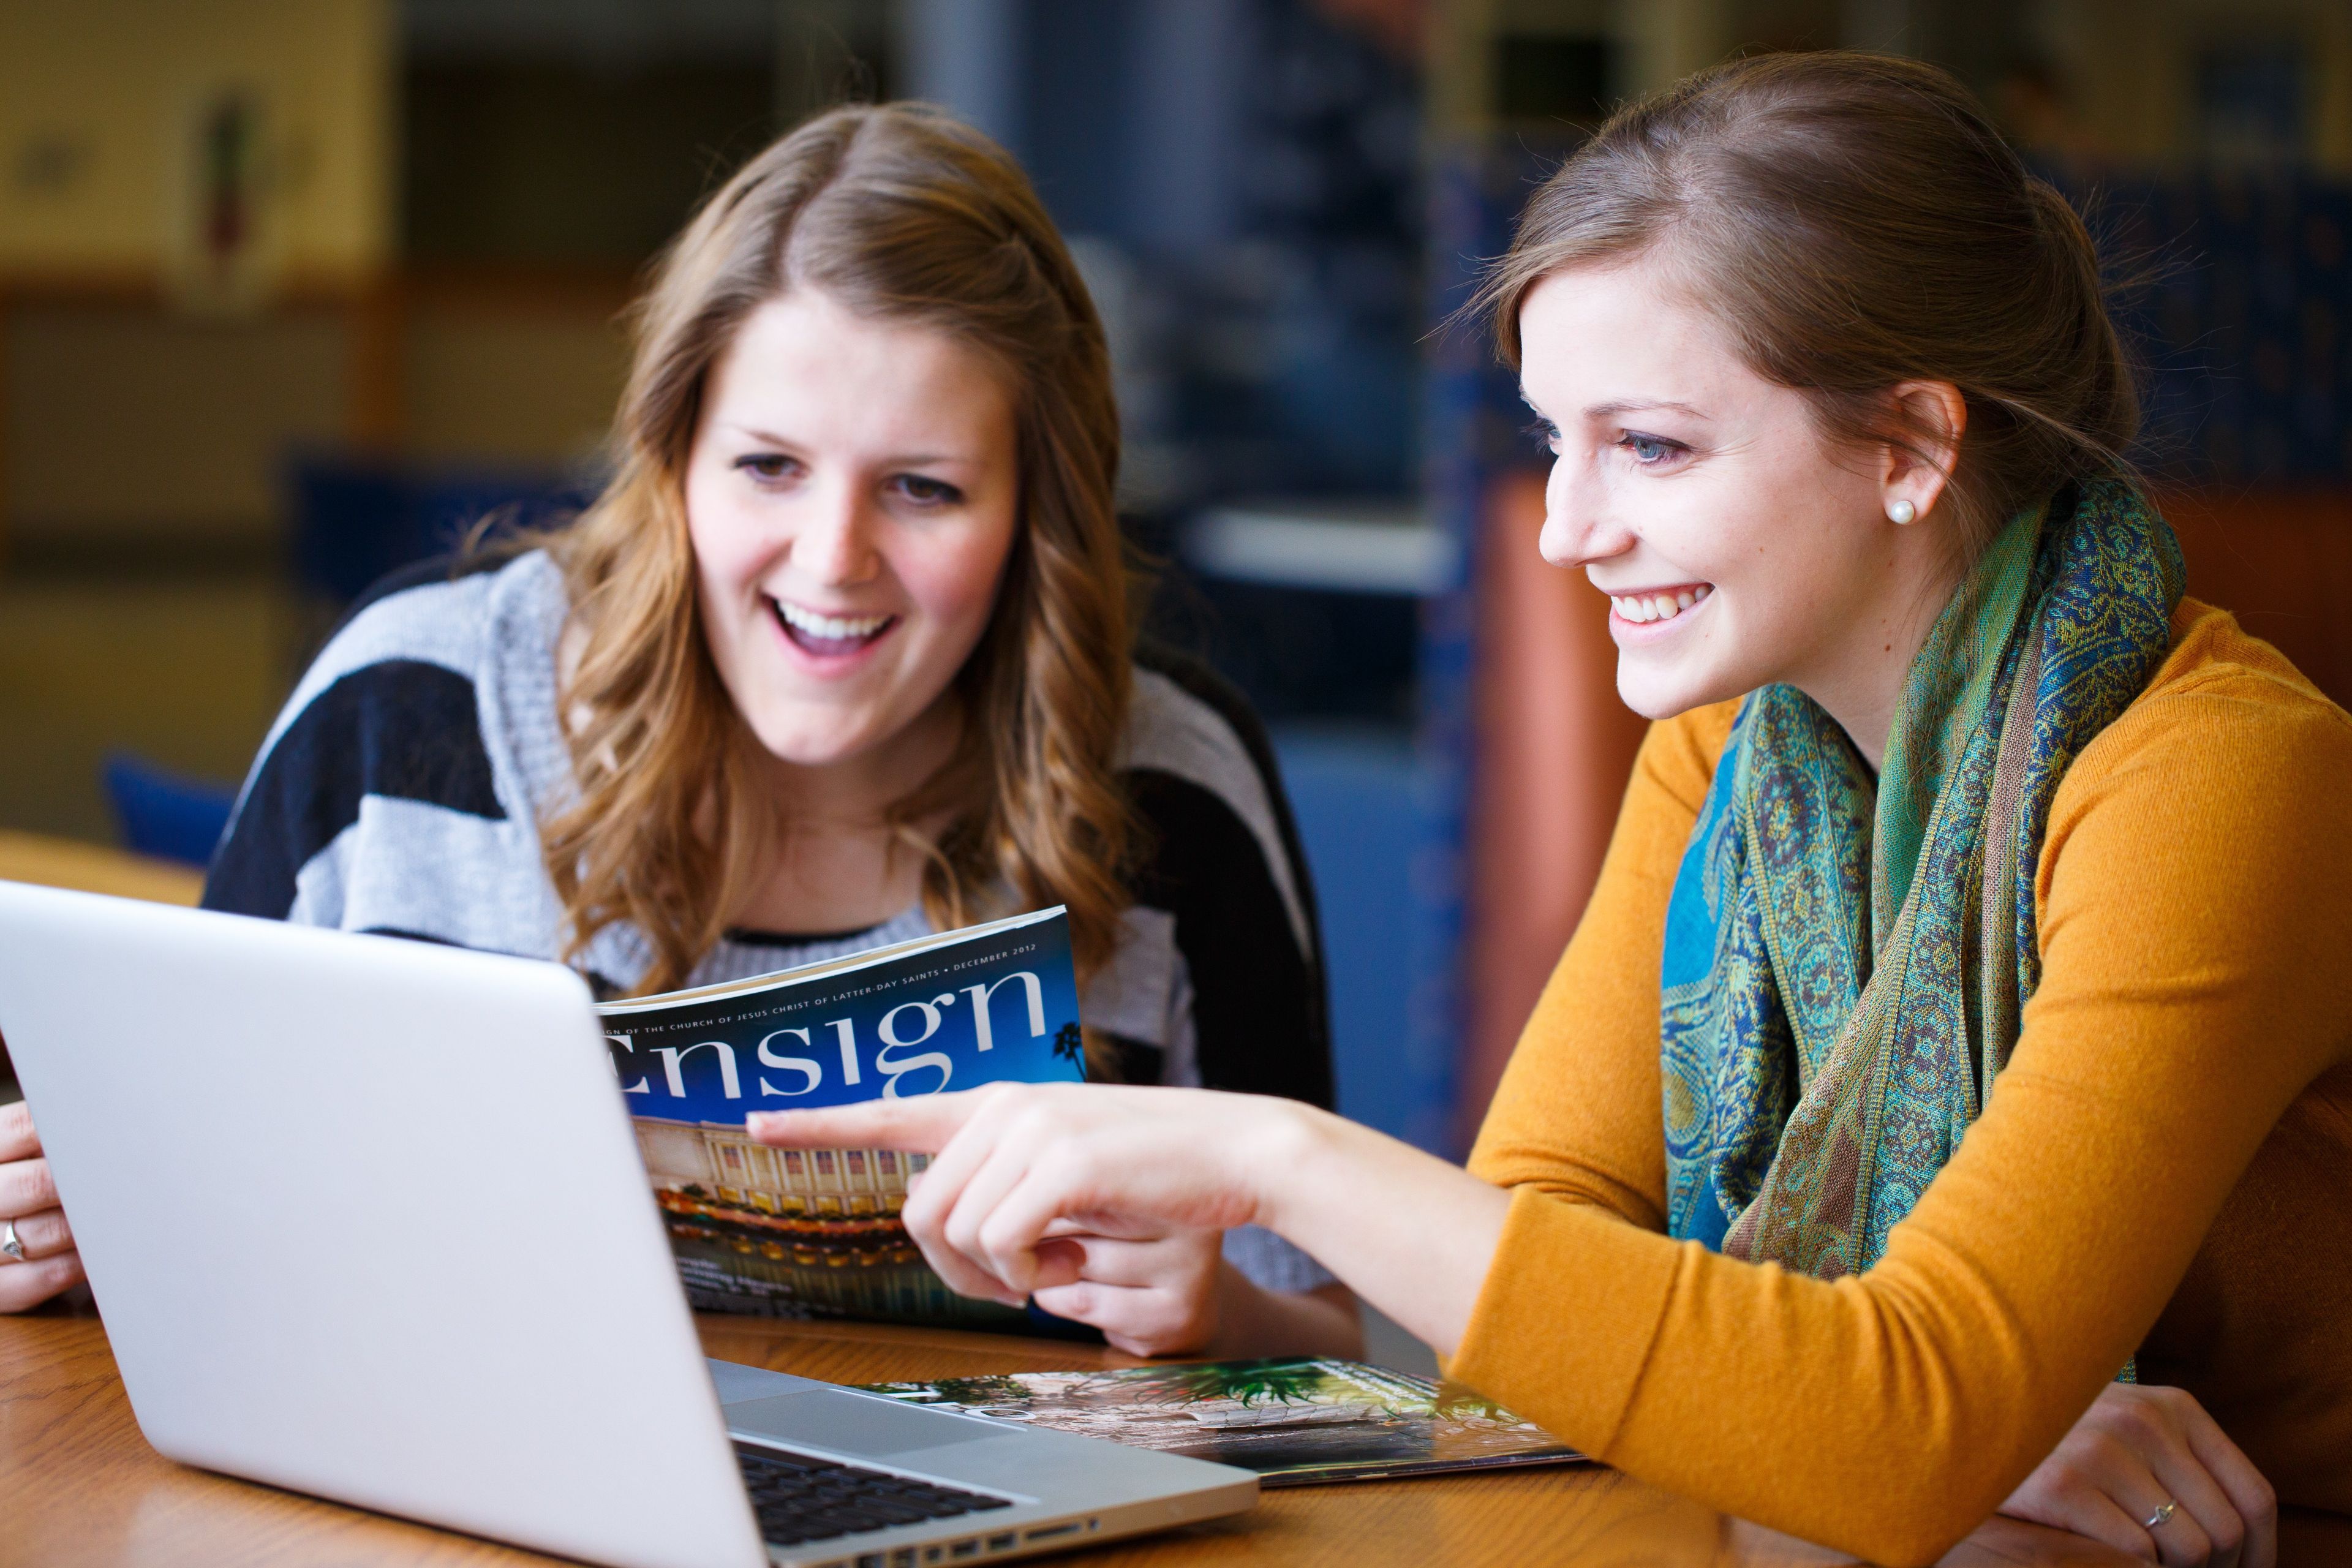 Two young women look at a laptop and read out of the Ensign.